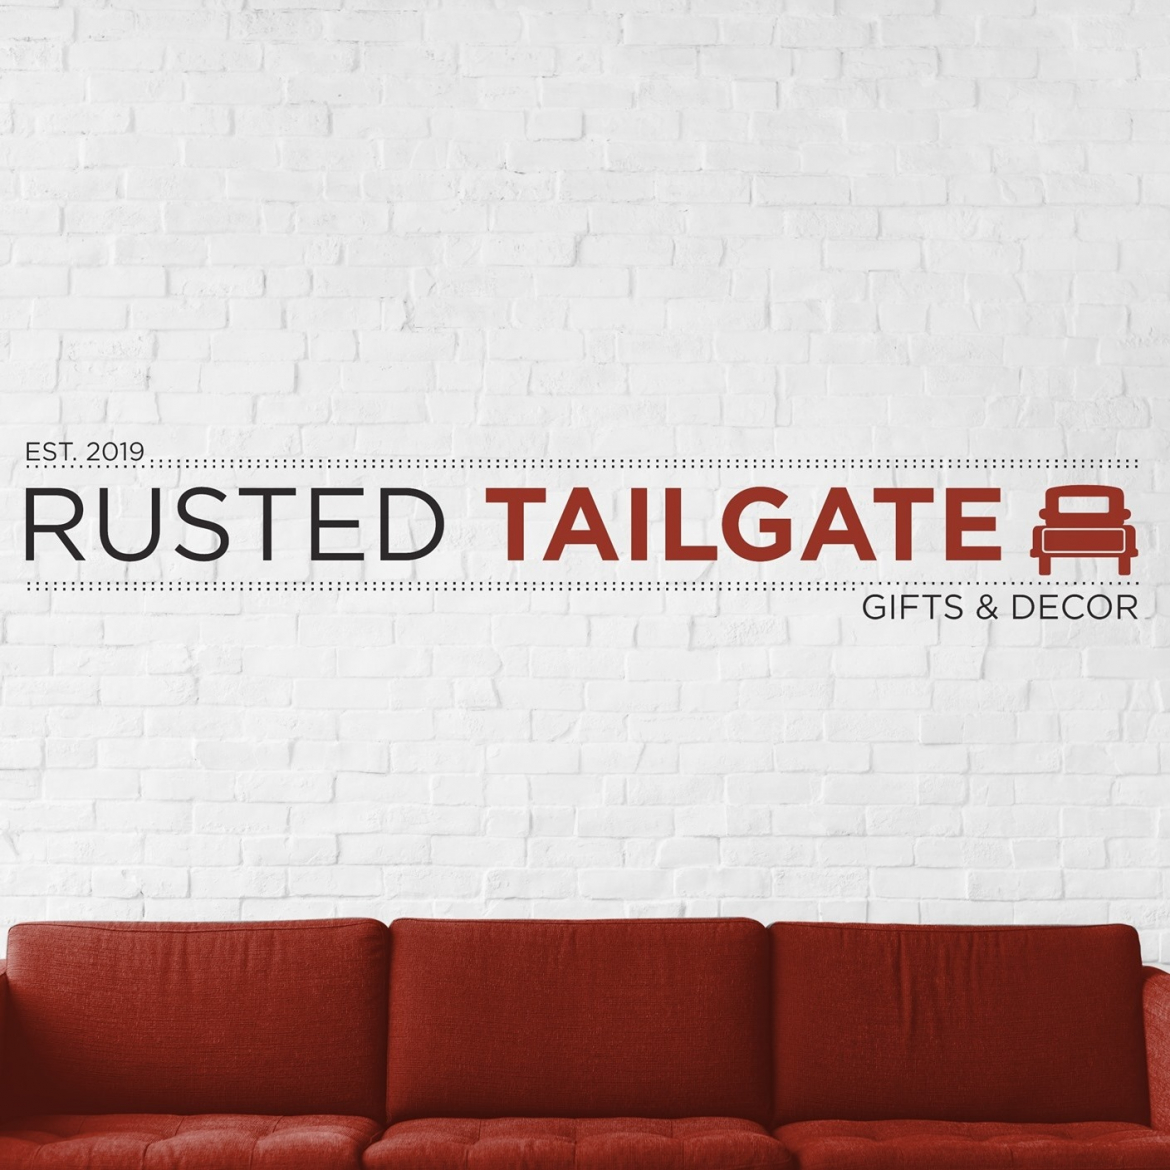 rusted tailgat wall sign with red truck graphic beside it over a auburn coloured couch 